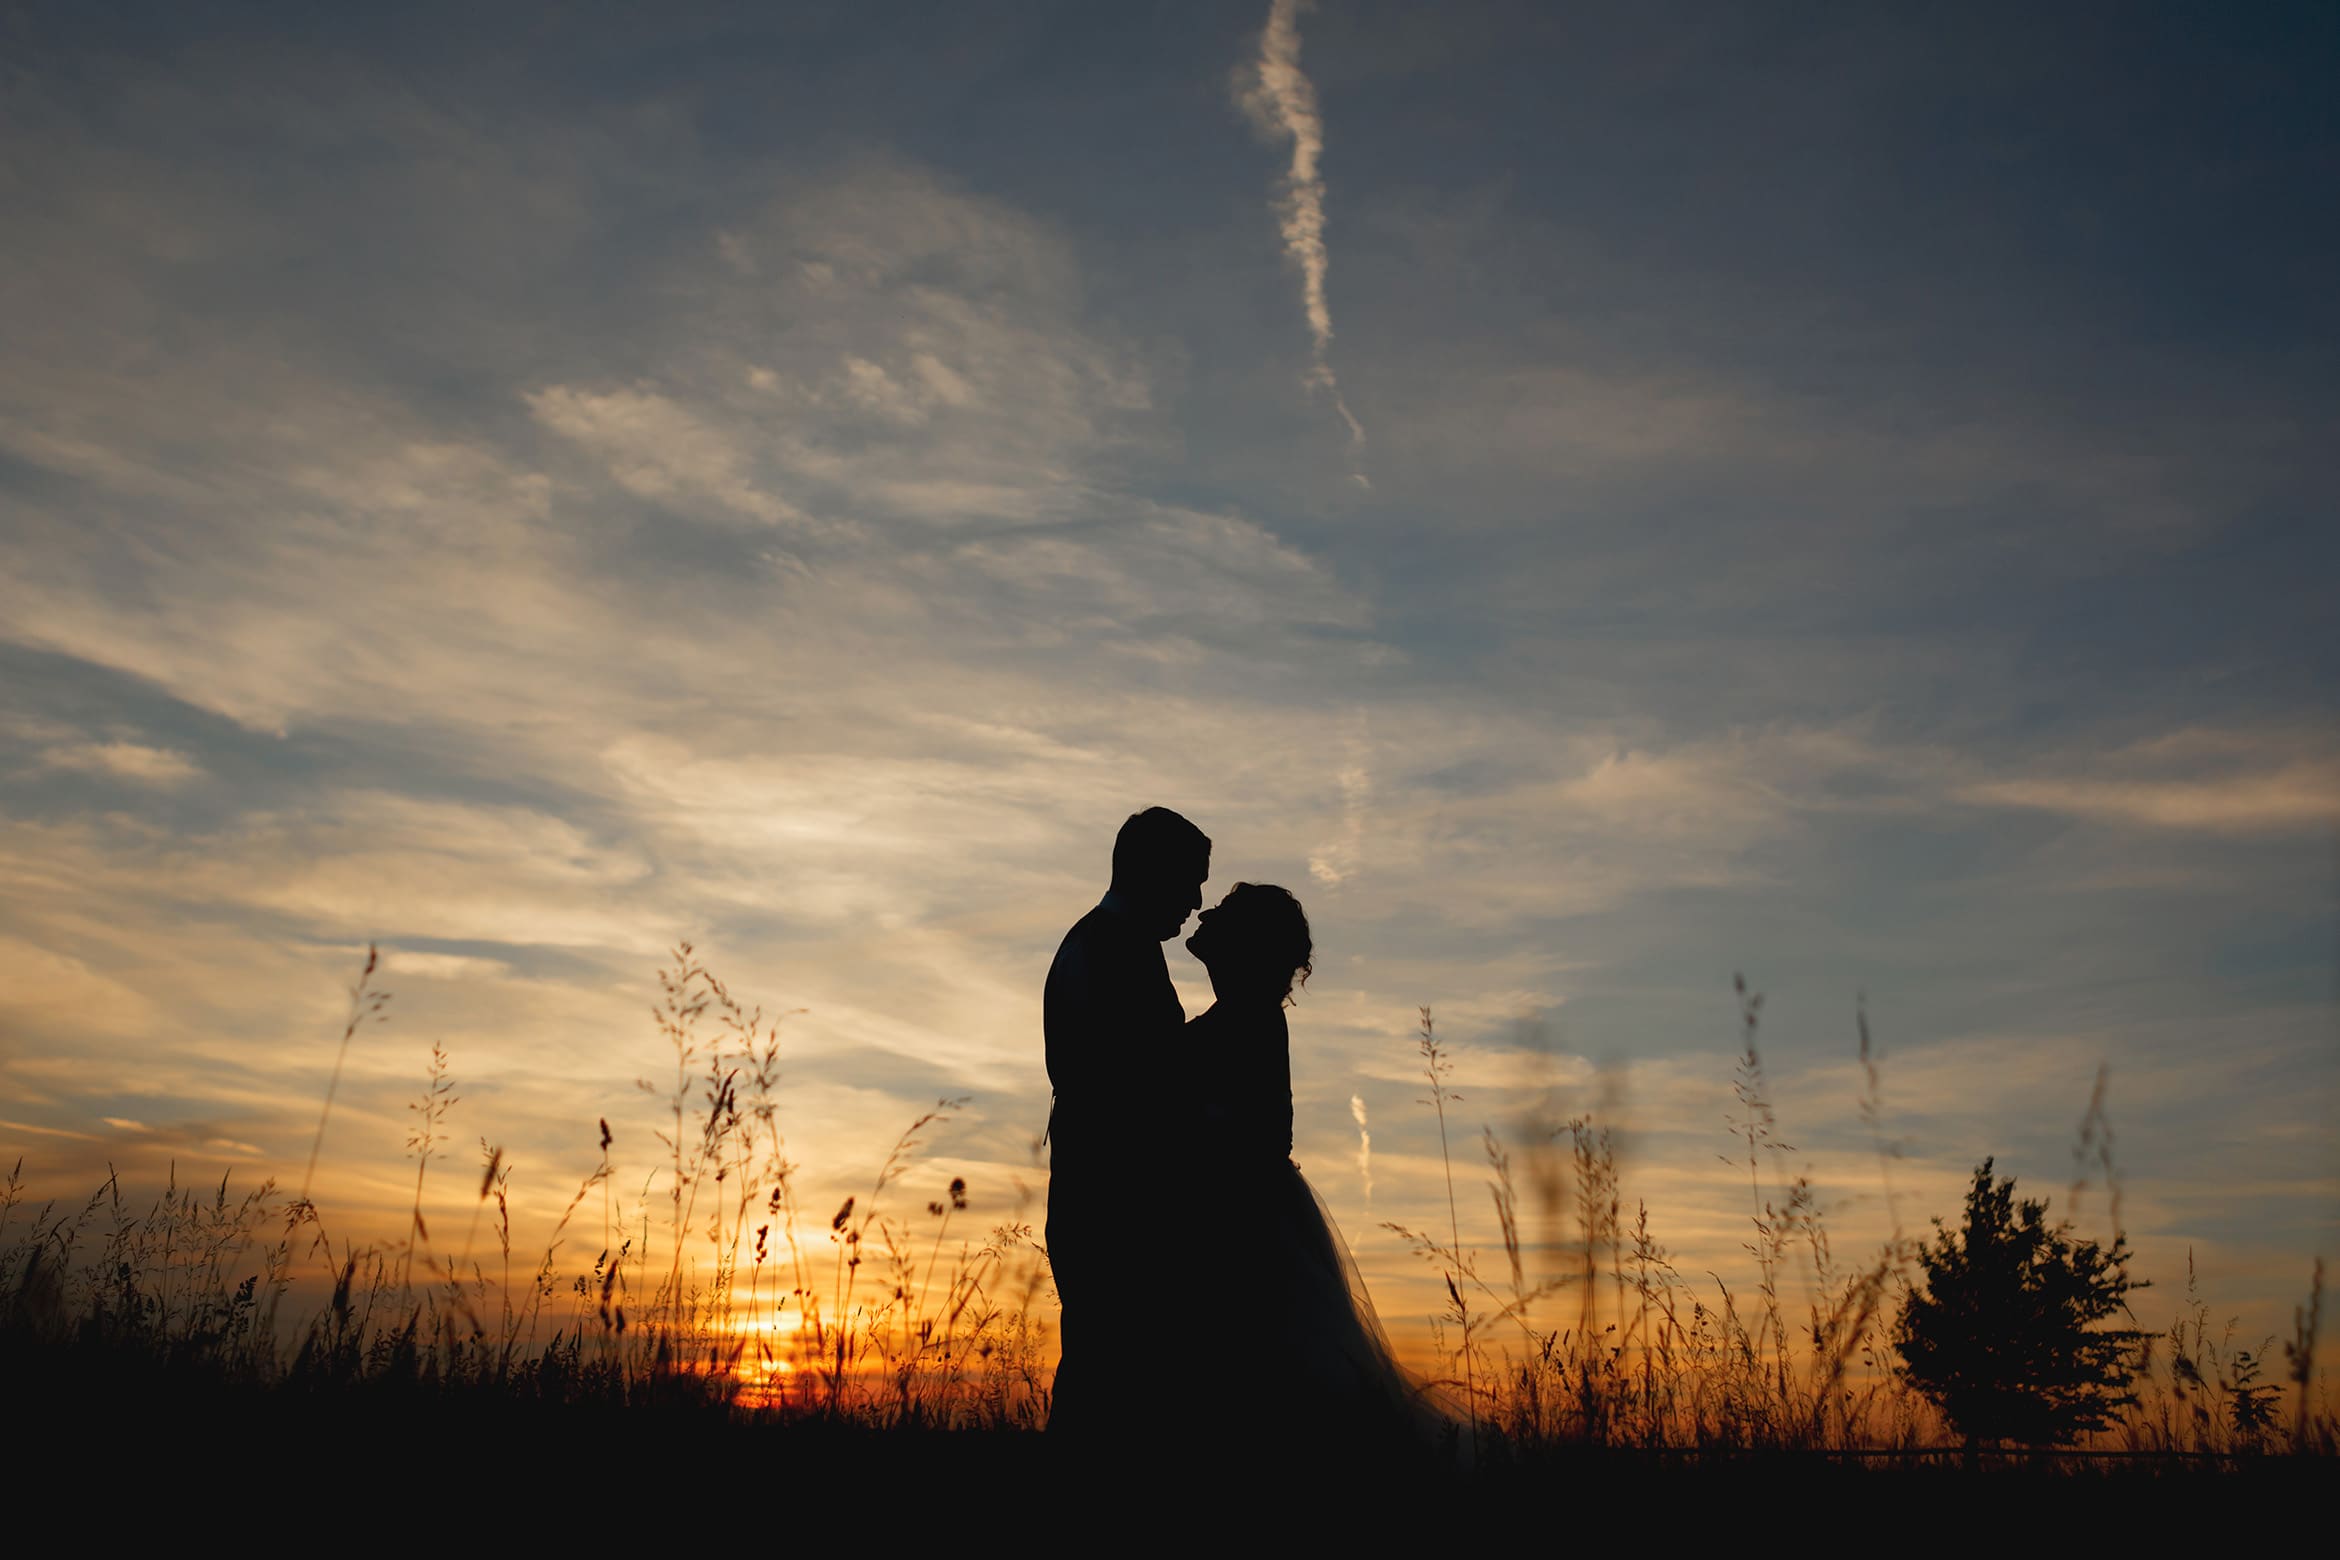 bride and groom in a summer solstice wedding sunset silhouette